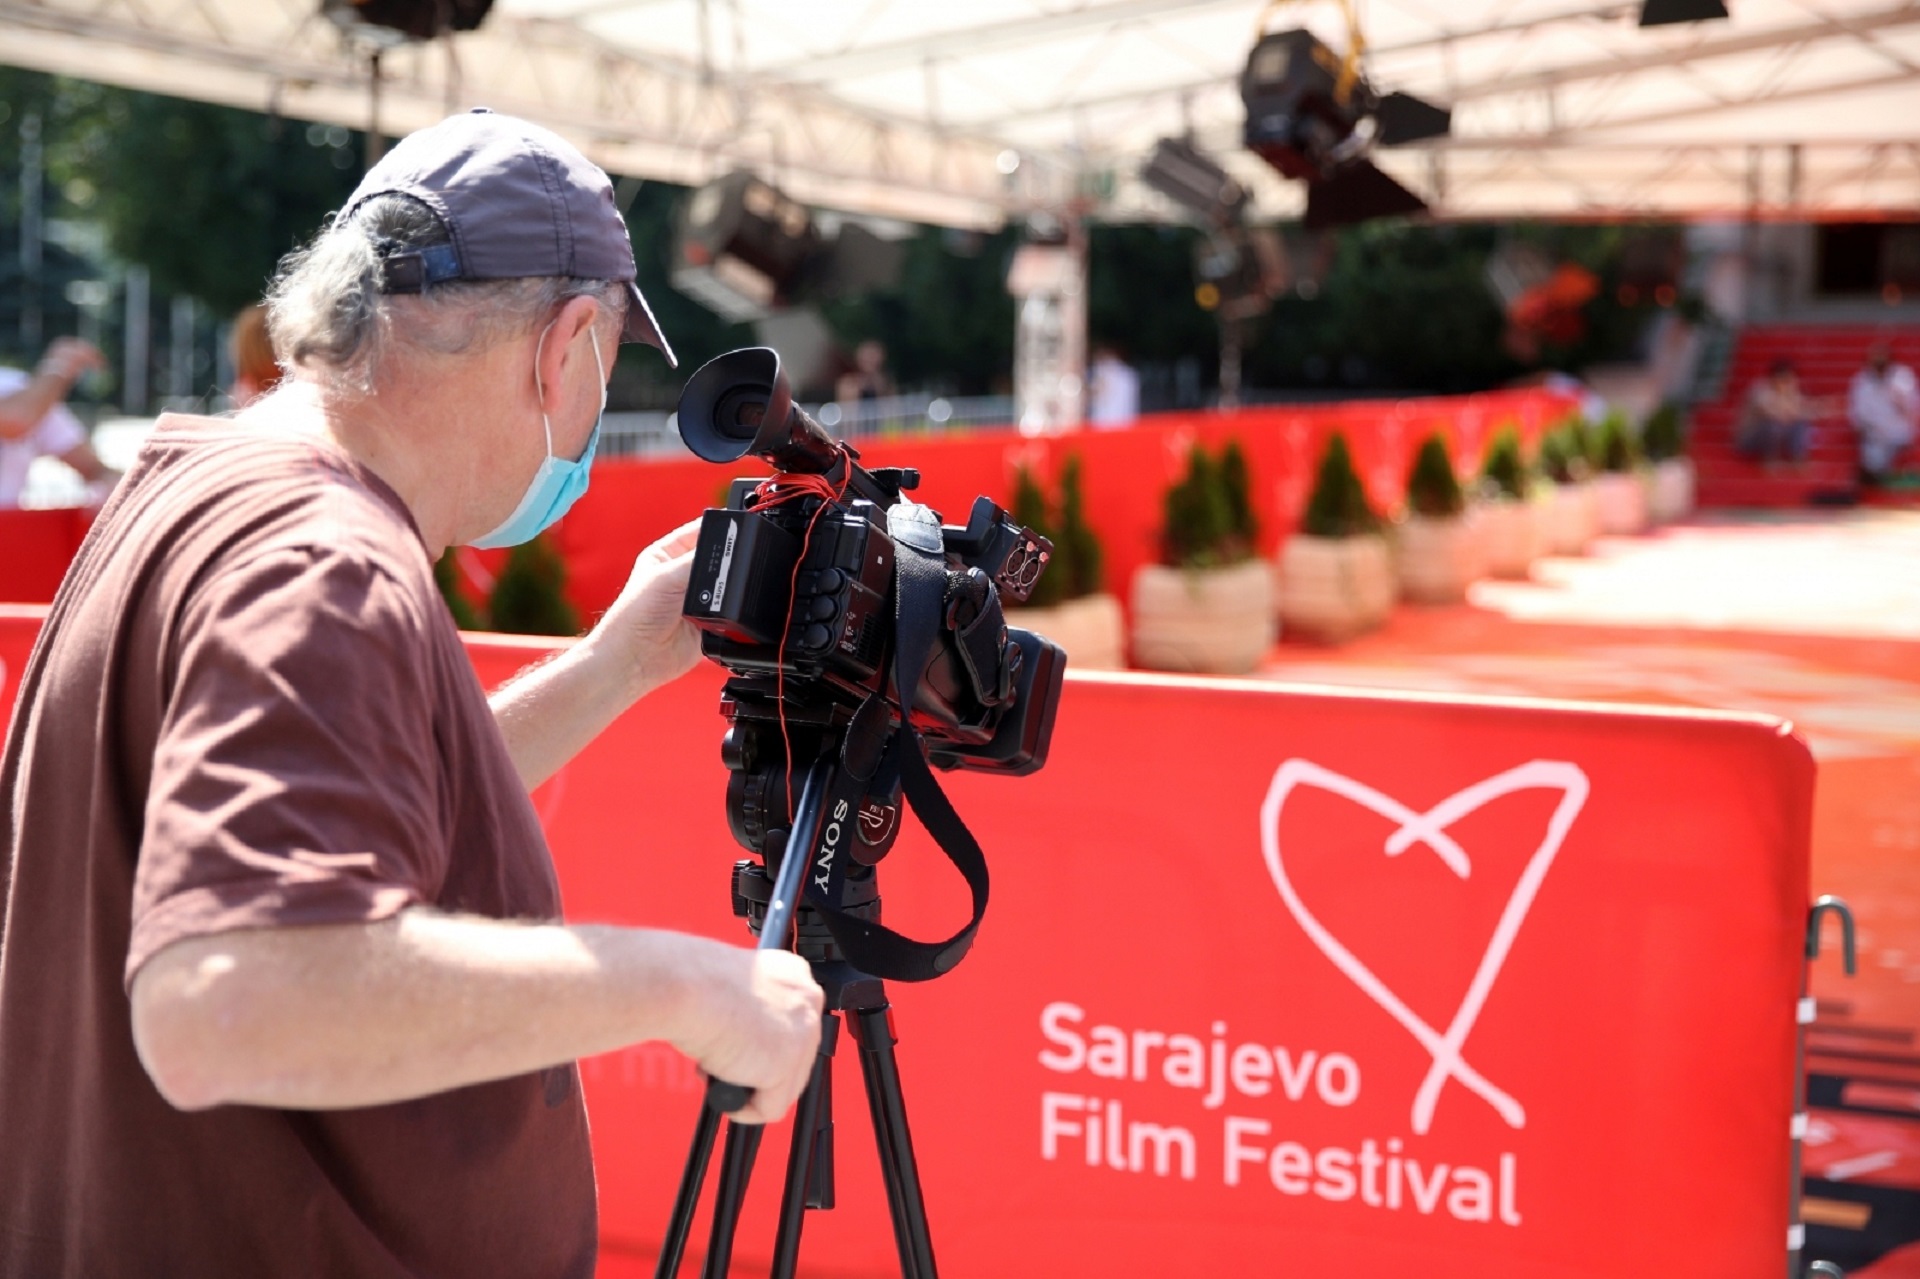 Cameraman records a red carpet before the online opening ceremony of the Sarajevo Film Festival in Sarajevo A cameraman records a red carpet before the online opening ceremony of the Sarajevo Film Festival in Sarajevo, Bosnia and Herzegovina August 14, 2020. The coronavirus disease (COVID-19) crisis forces Sarajevo film festival to go online. REUTERS/Dado Ruvic DADO RUVIC